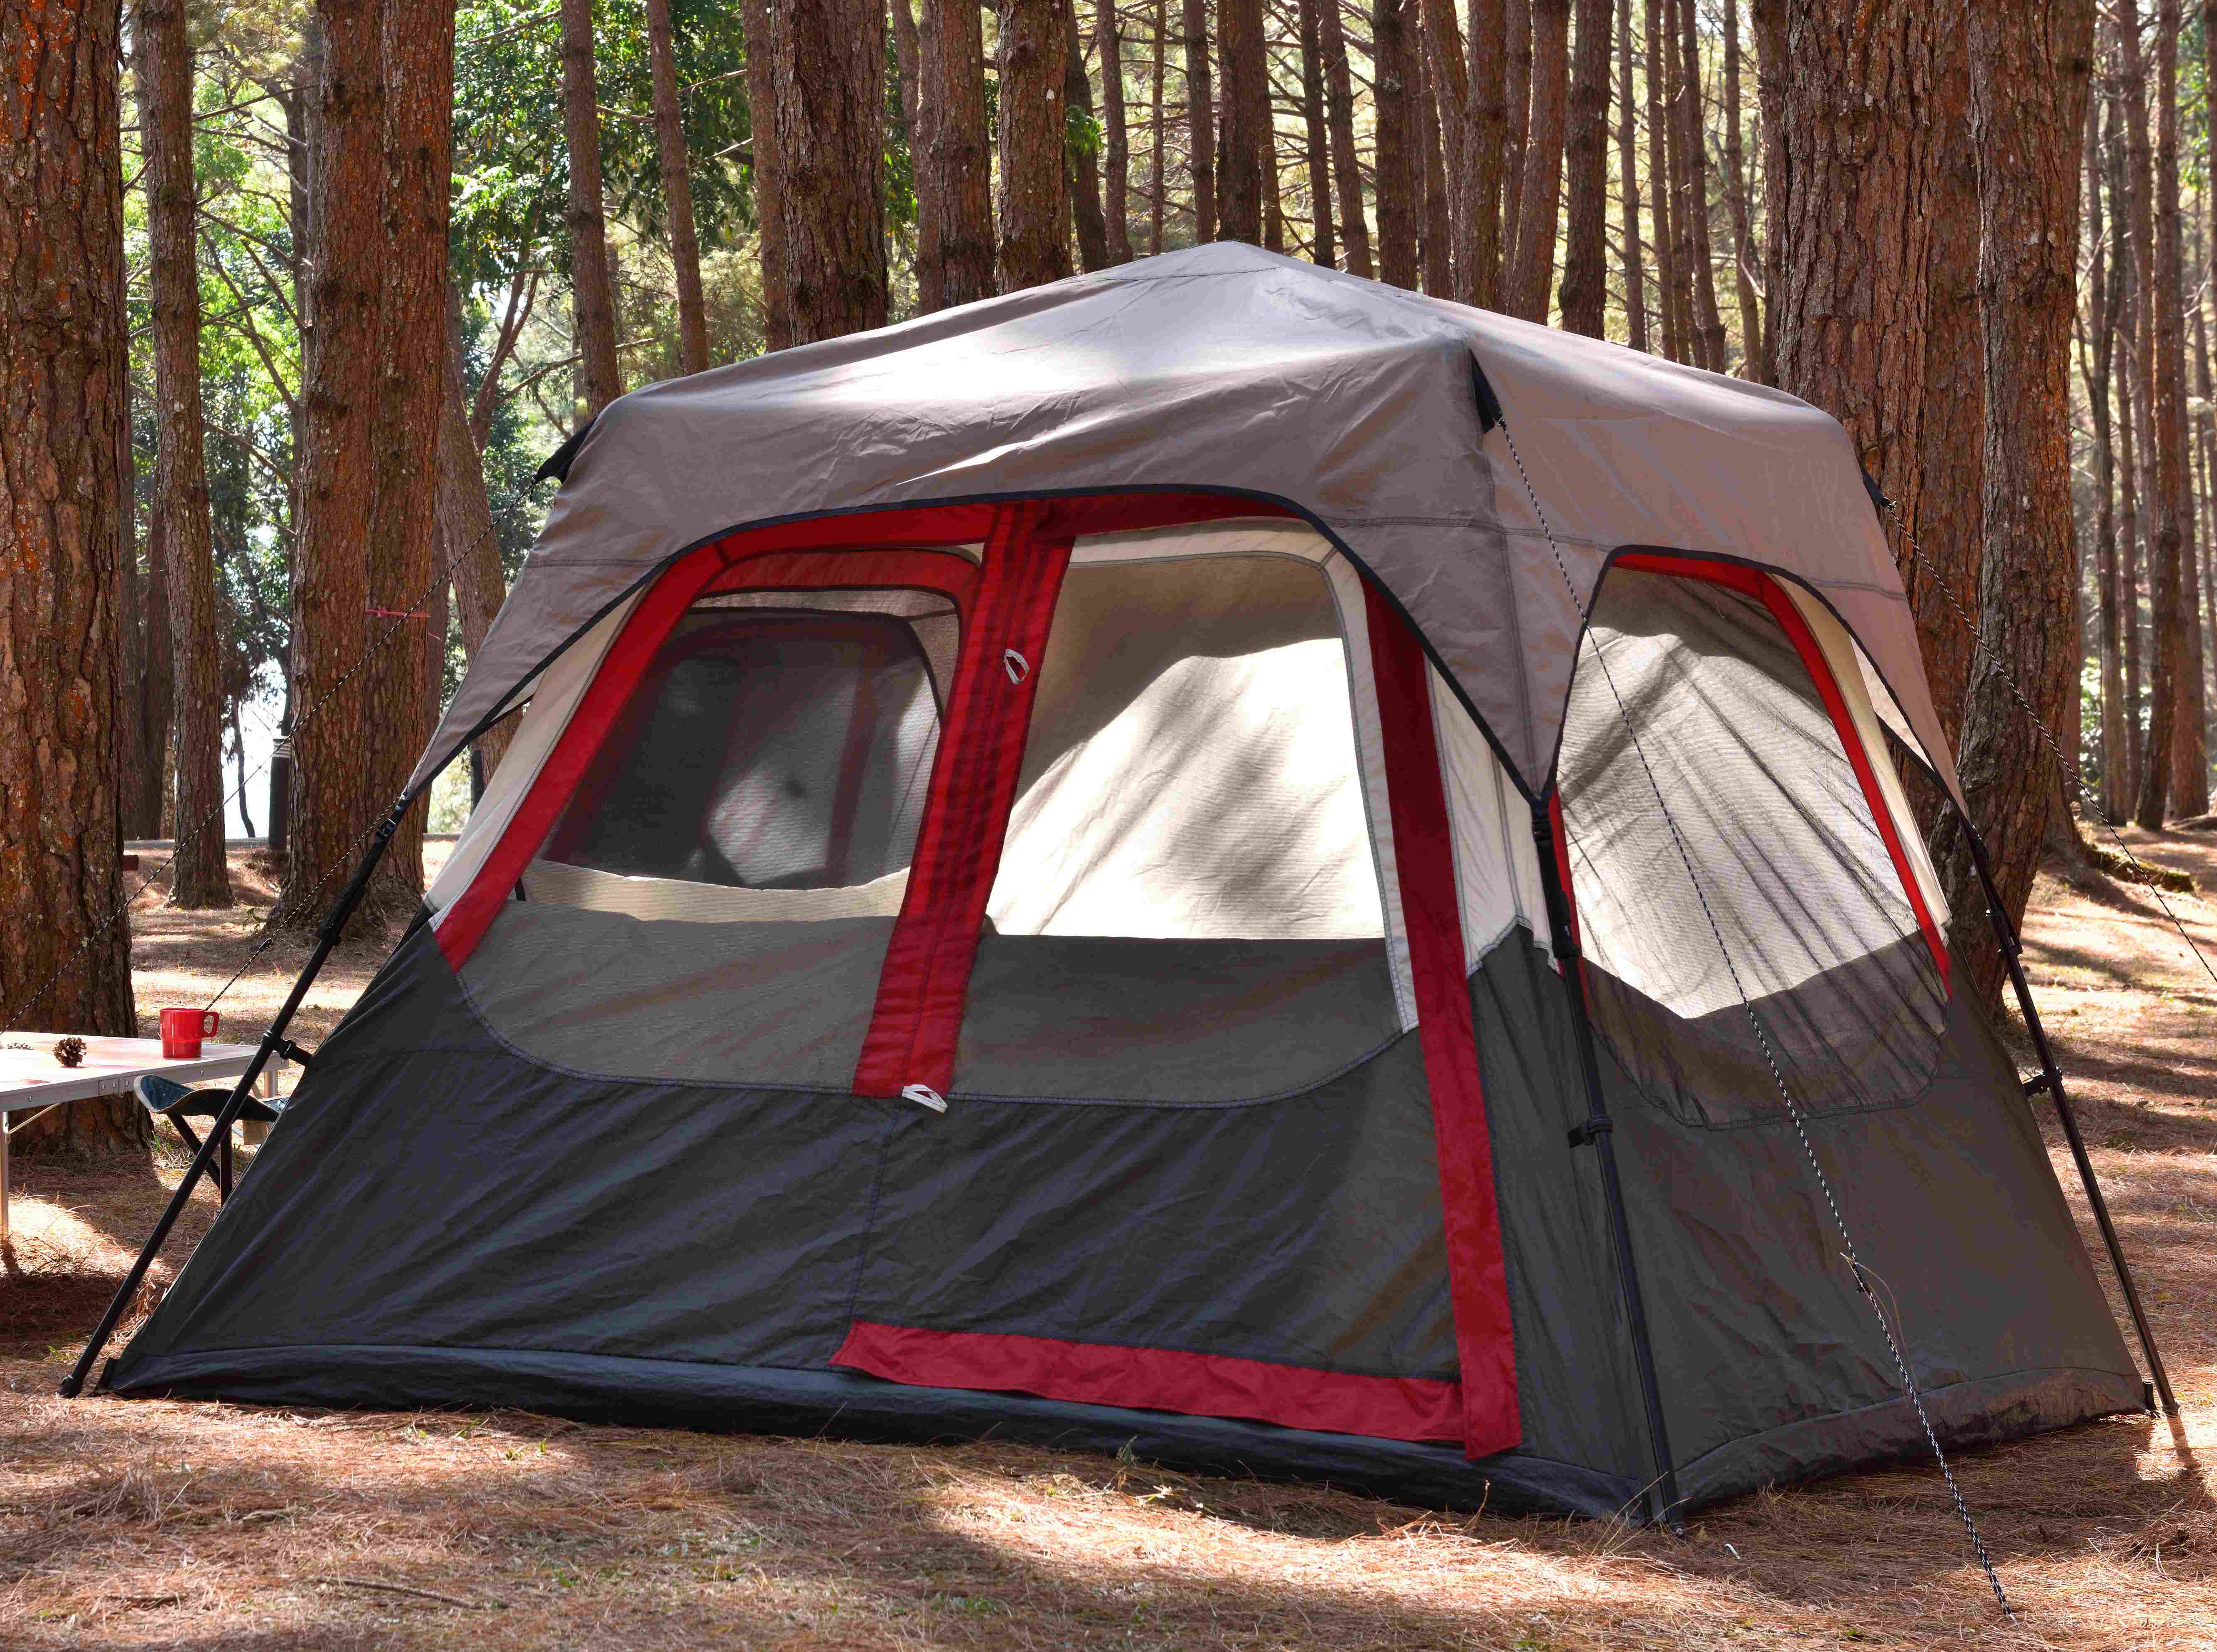 The 10 Best Waterproof Tents for Camping Reviews & Guide 2020